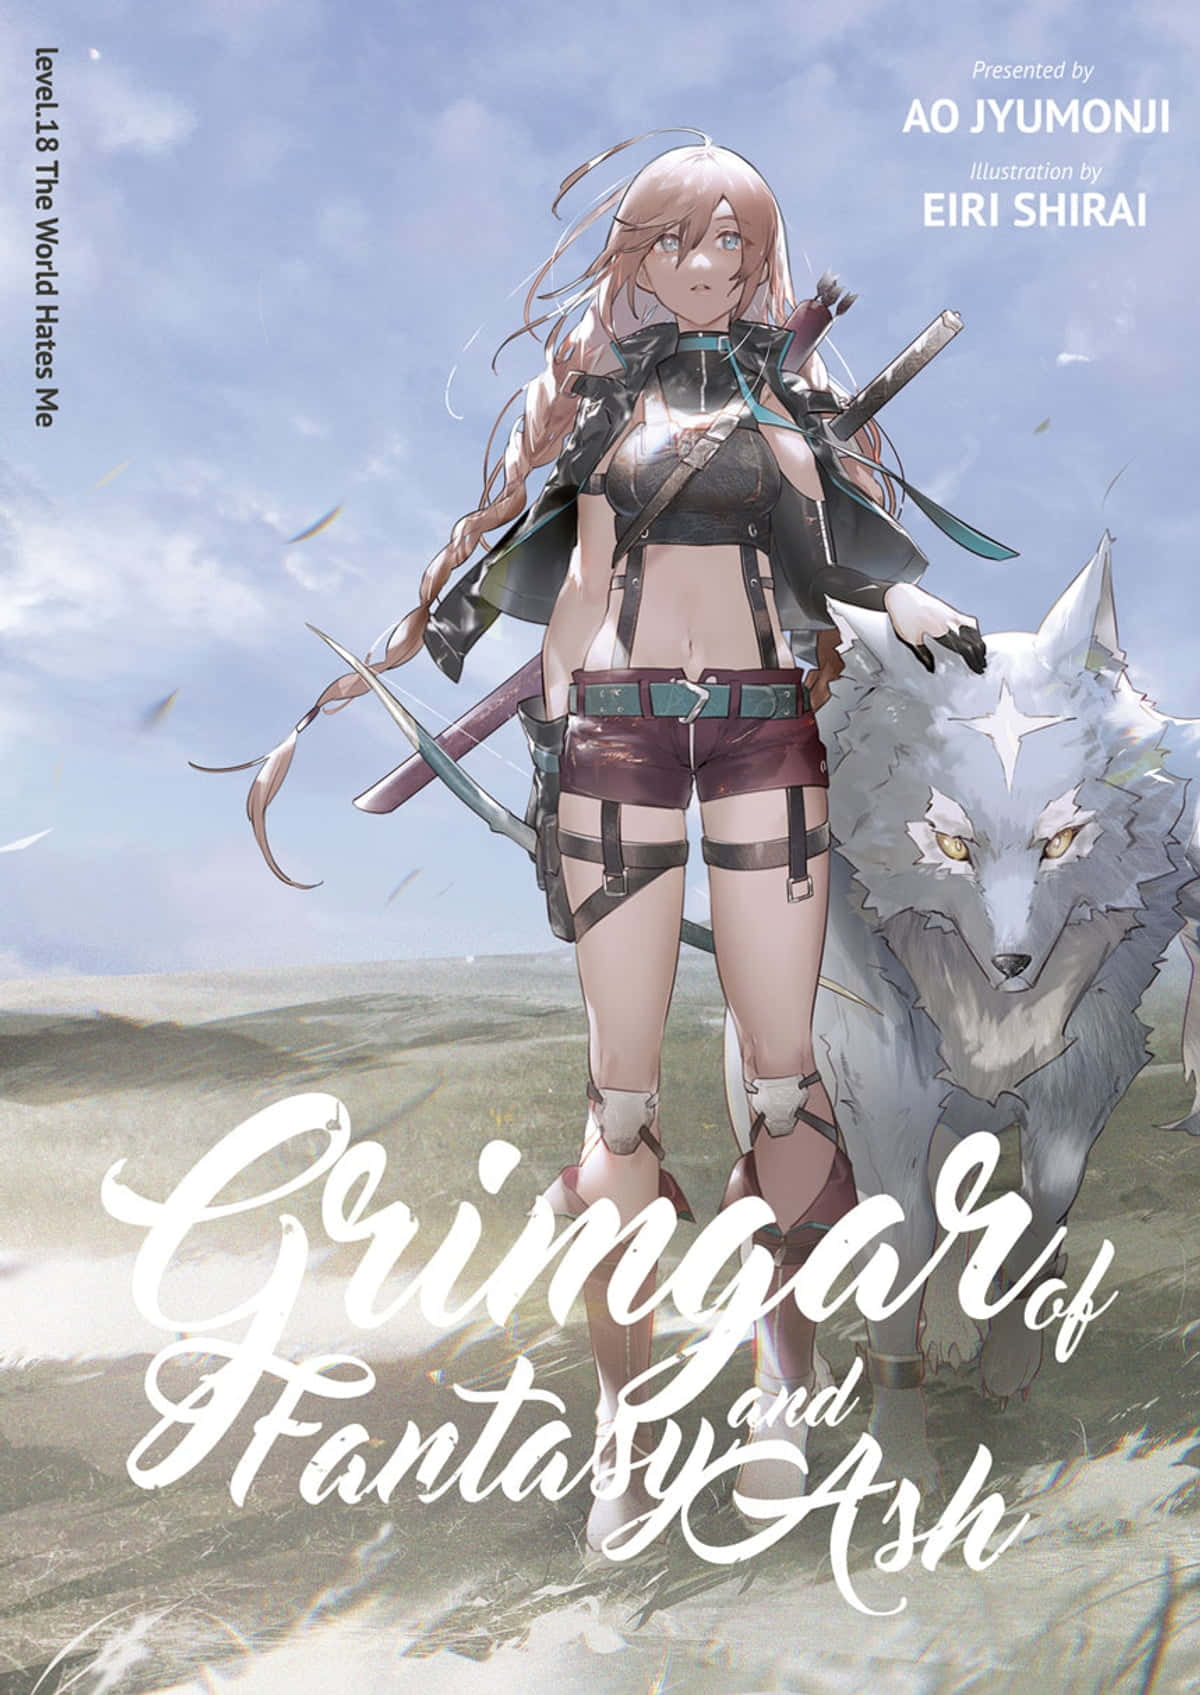 Follow the Adventurers' Journey in Grimgar Of Fantasy And Ash Wallpaper